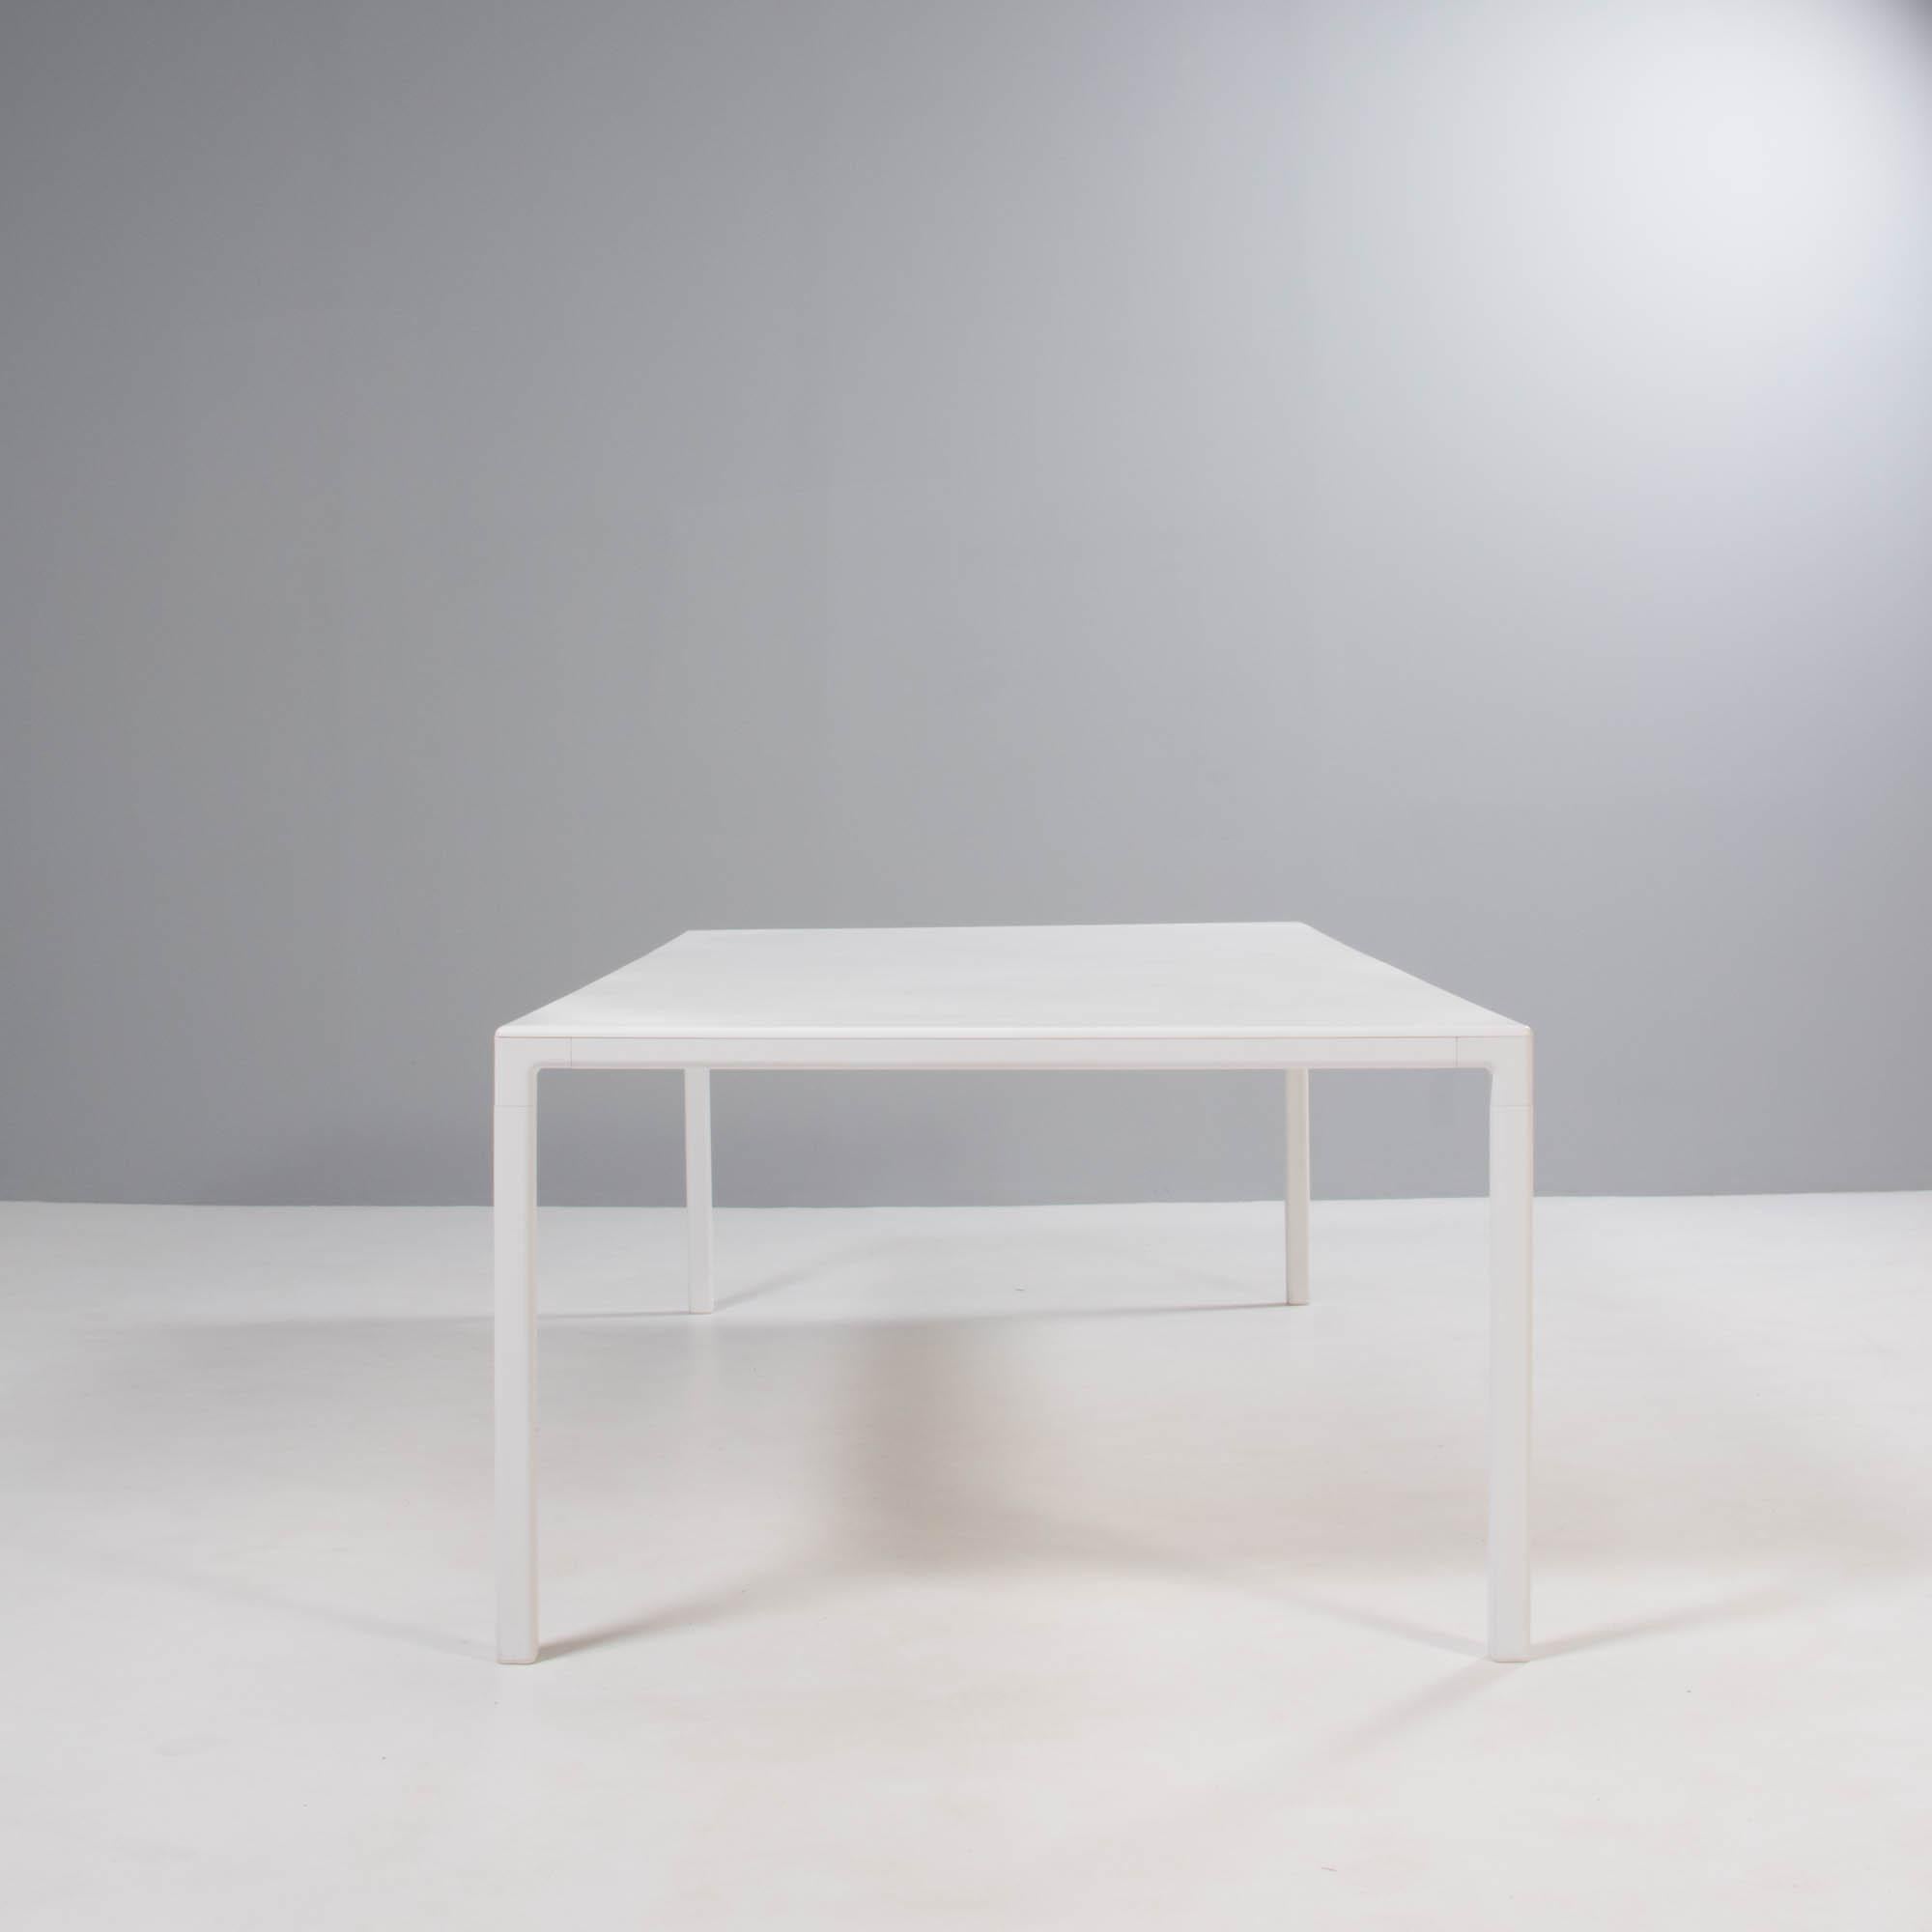 European HAY T12 White Dining Table